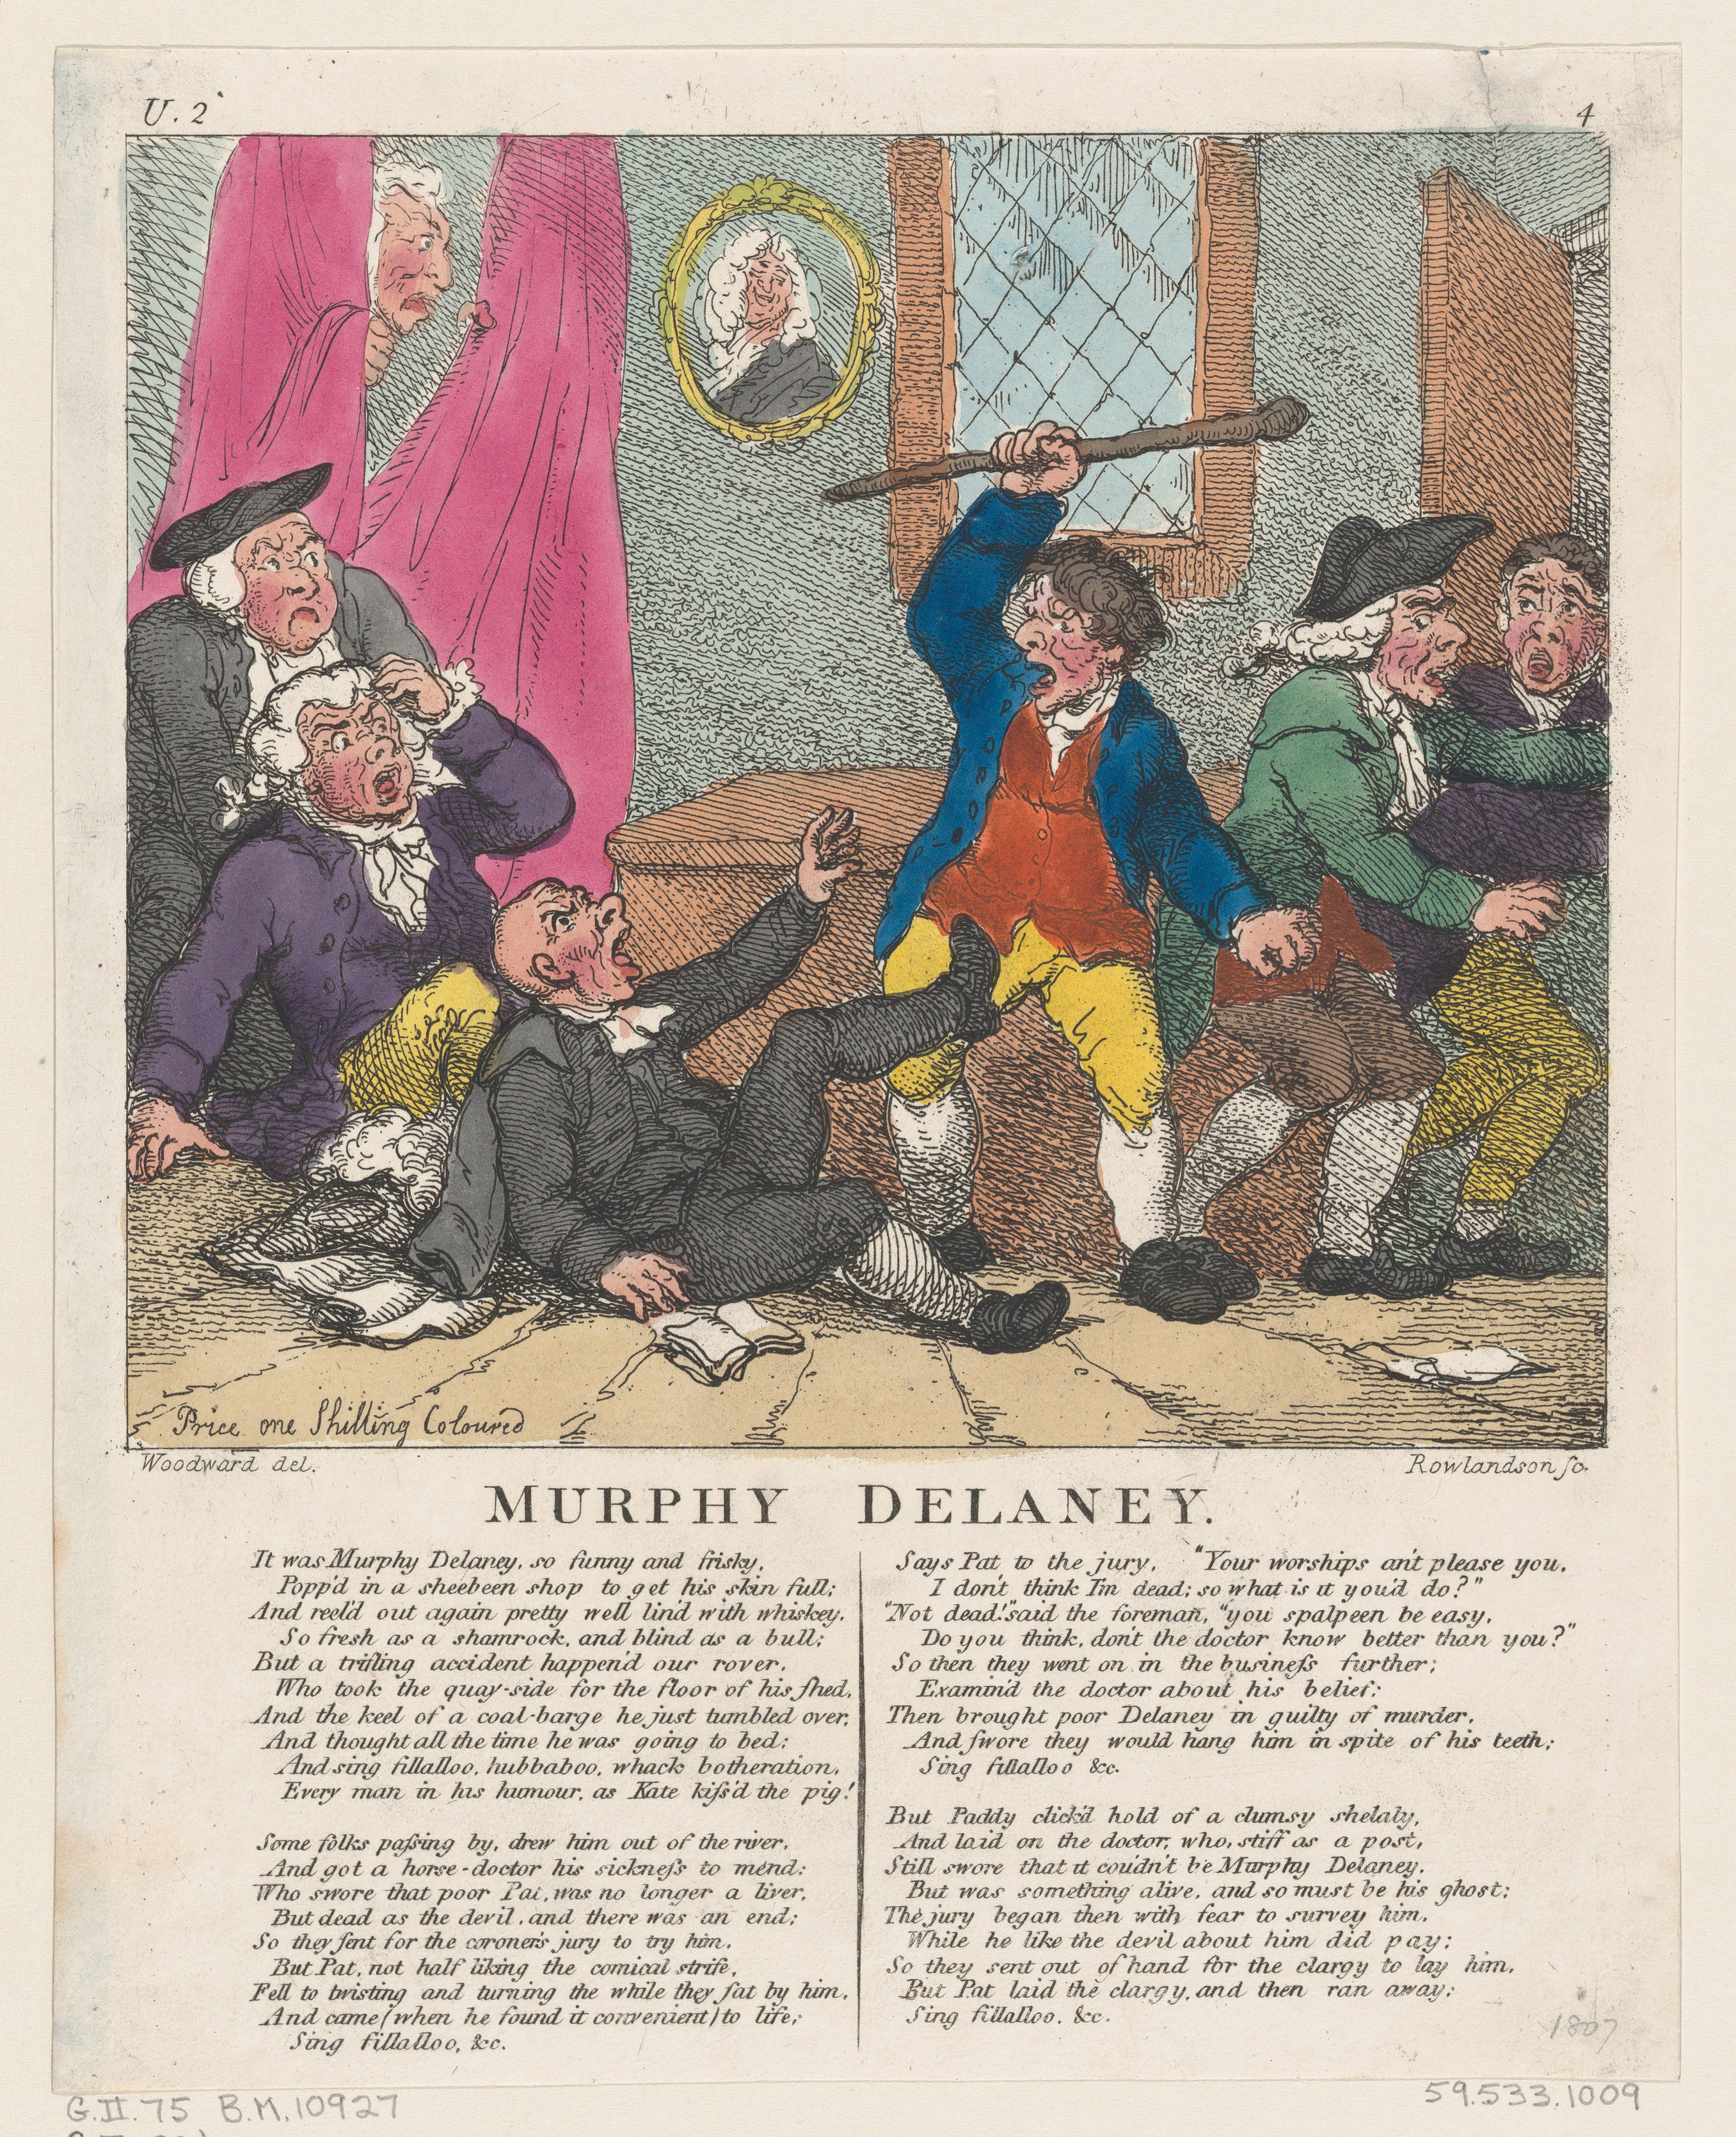 'Murphy Delaney' - print by Thomas Rowlandson, after George Murgatroyd Woodward, June 15, 1807. From the The Metropolitan Museum of Art, New York.